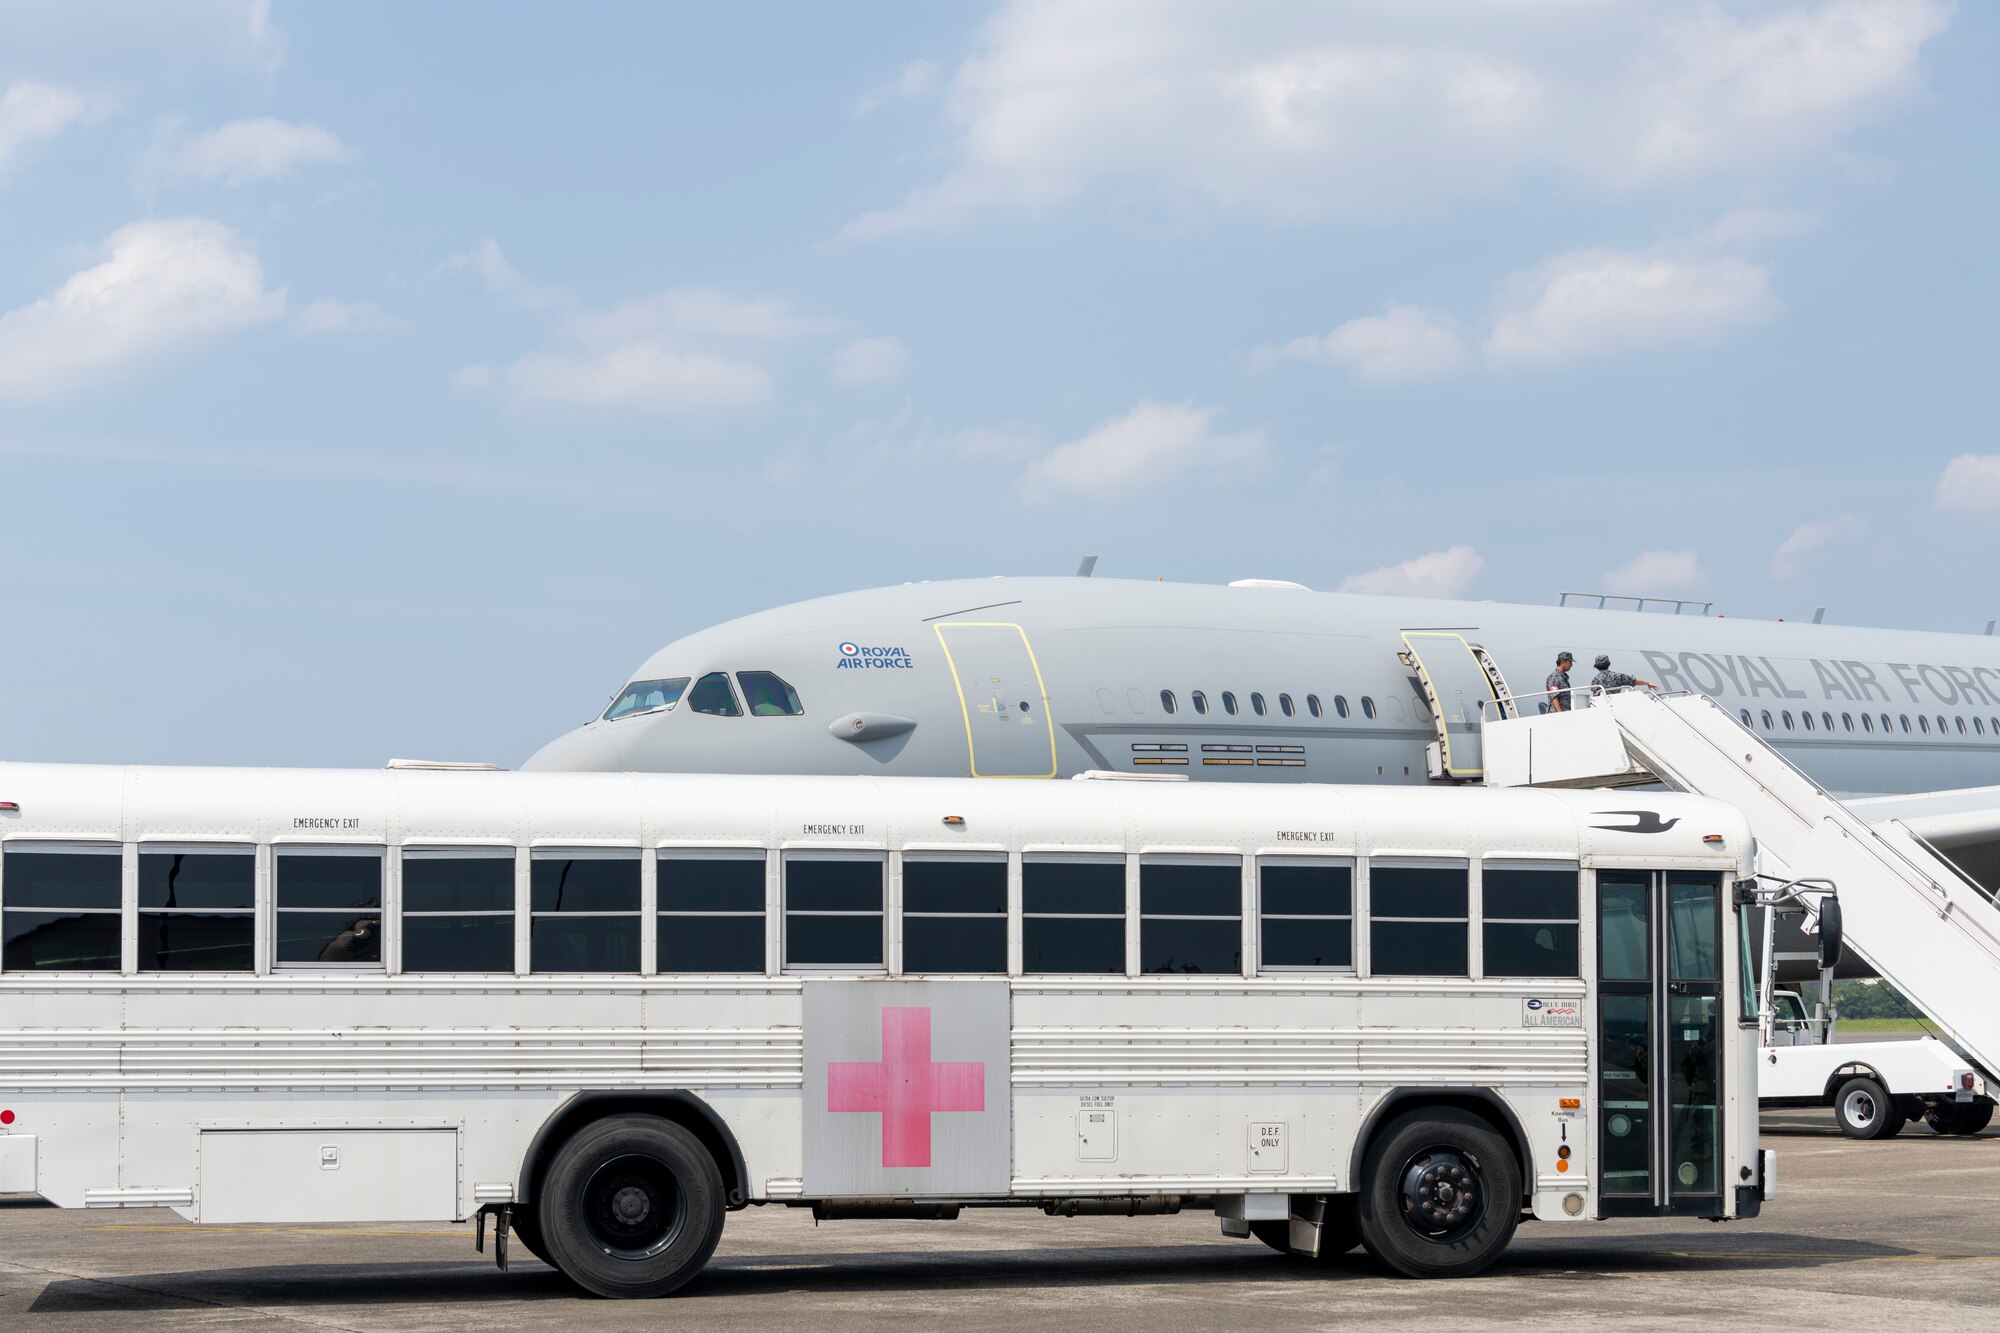 A medical transport bus waits to transport patients.